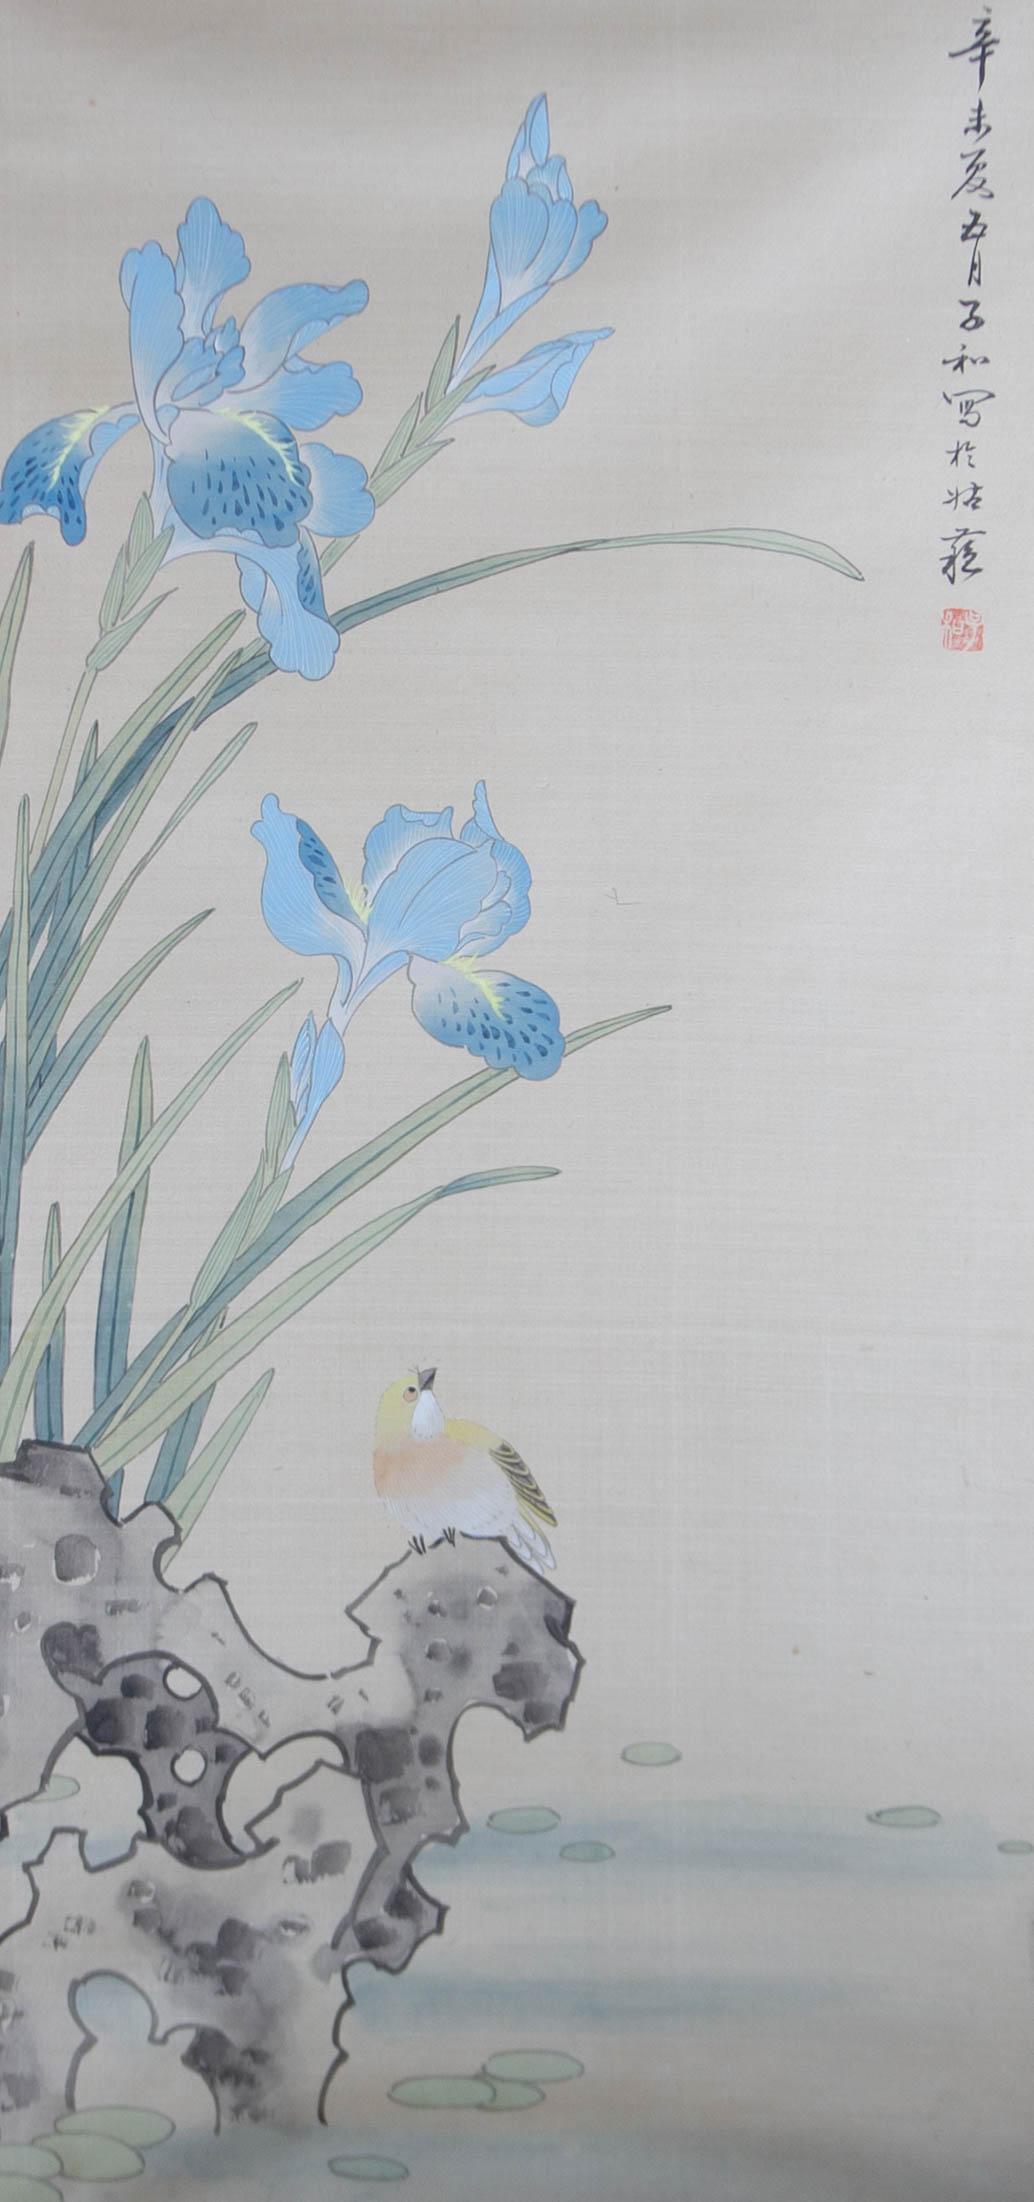 A pretty Chinese watercolour on cotton, showing blue irises in full bloom with a yellow finch perched on rocks at their base. The artist has finished the artwork with their signature and seal in the upper right. The painting is presented in a gilt